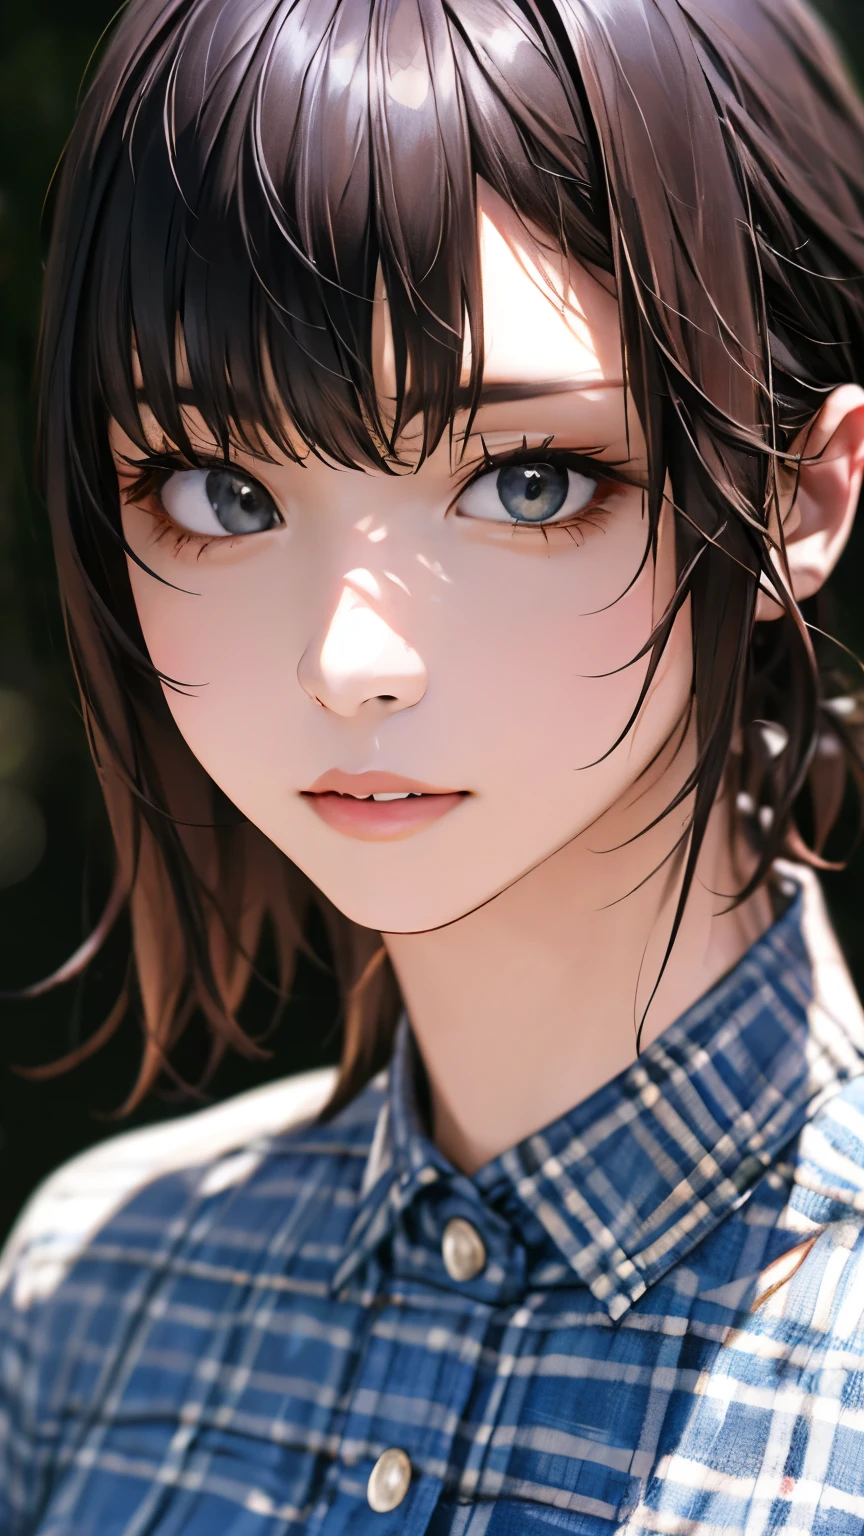 (hig彼st quality、8k、32k、masterpiece)、(Realistic)、(Realistic:1.2)、(High resolution)、Very detailed、Very beautiful face and eyes、1 girl、Delicate body、short hair, (hig彼st quality、Attention to detail、Rich skin detail)、(hig彼st quality、8k、Oil paint:1.2)、Very detailed、(Realistic、Realistic:1.37)、Bright colors、Full Body Shot, (Casual Fashion)